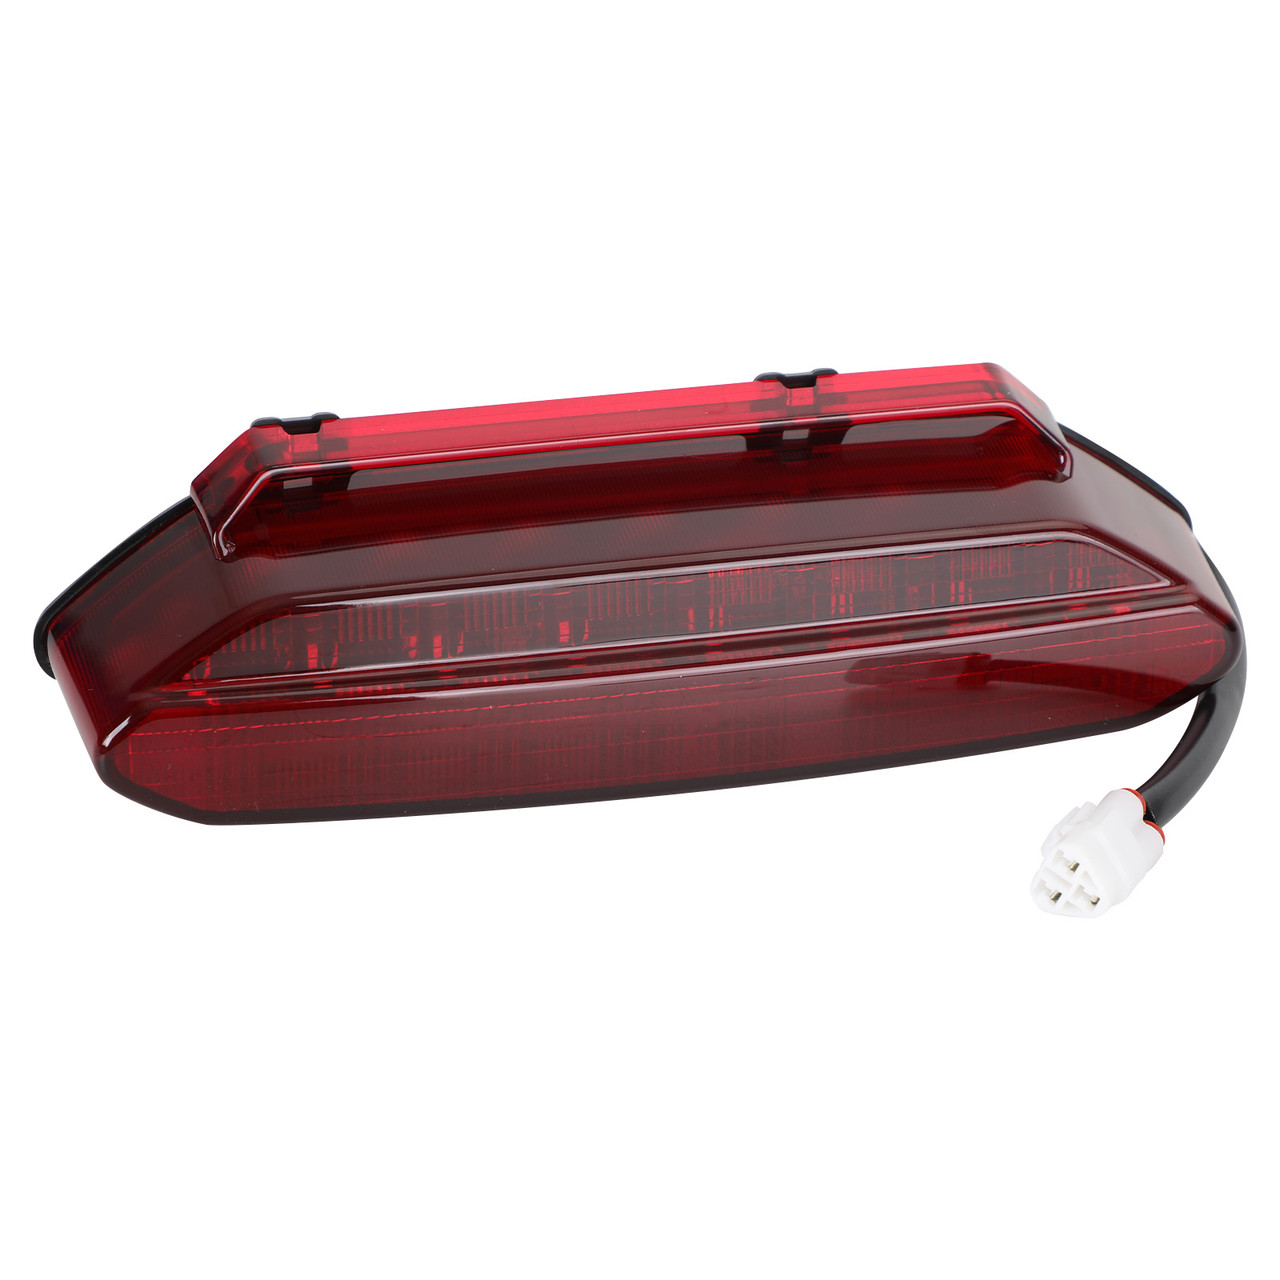 LED Tail Light Taillight for YAMAHA YFZ450 2006-2009 5TG-84710-21-00 Red